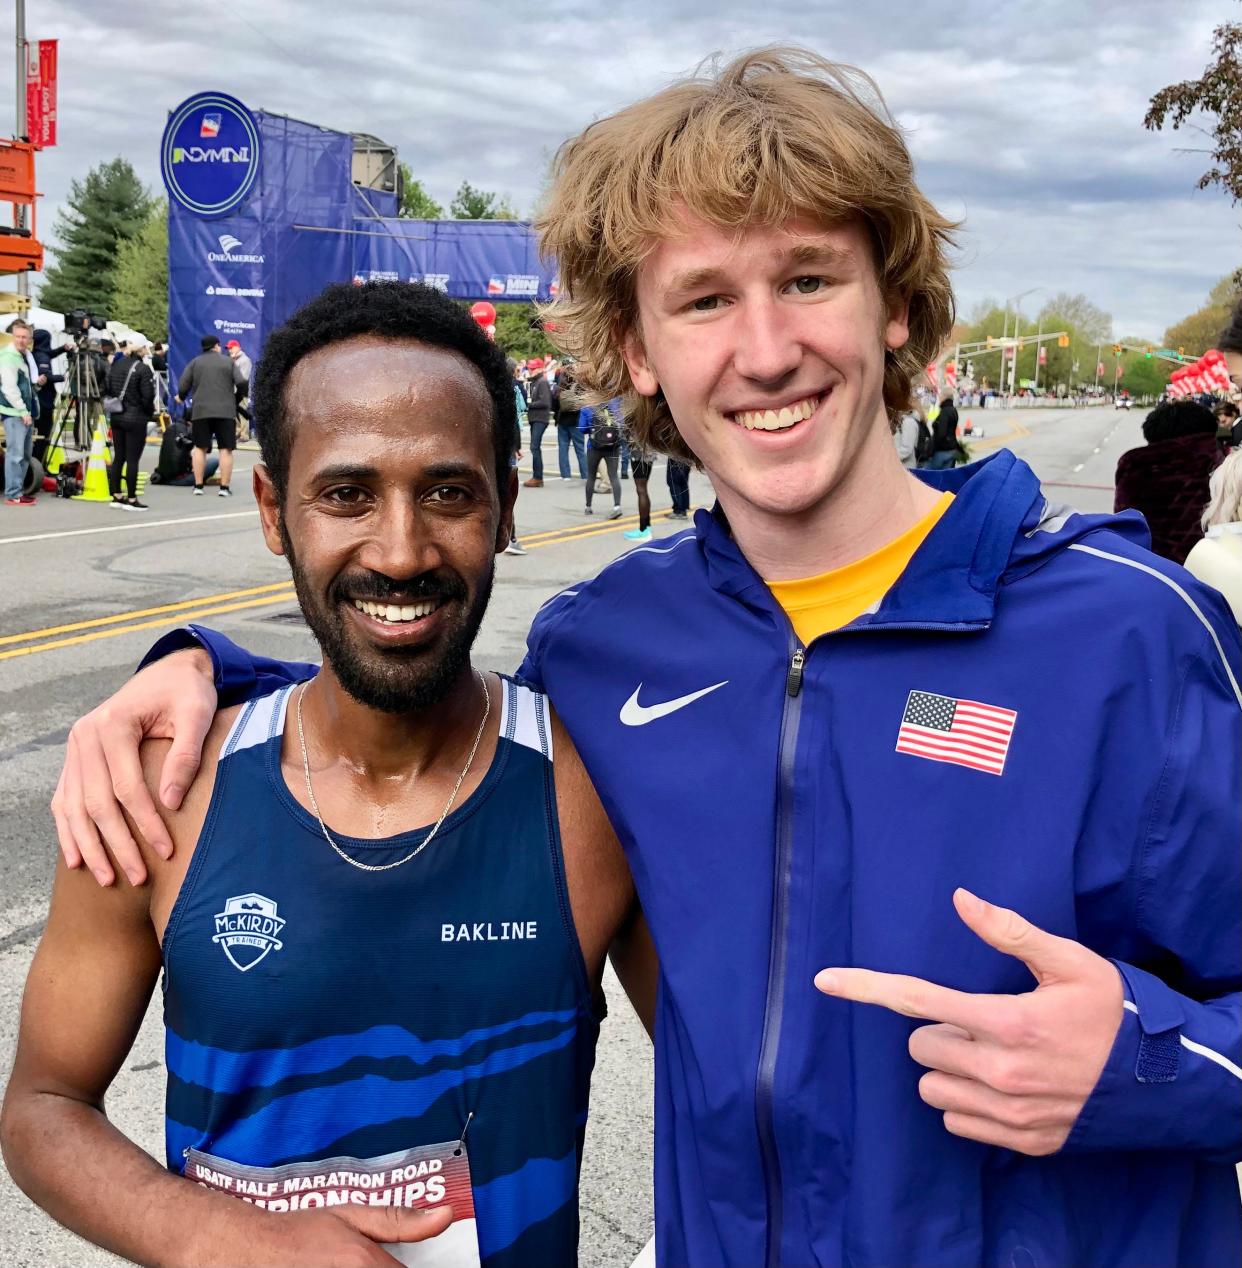 Futsum Zienasellassie (left) with Carmel’s Kole Mathison is by me. Both were national champions in high school cross-country, and Mathison broke Futsum’s state record for 3200 meters.